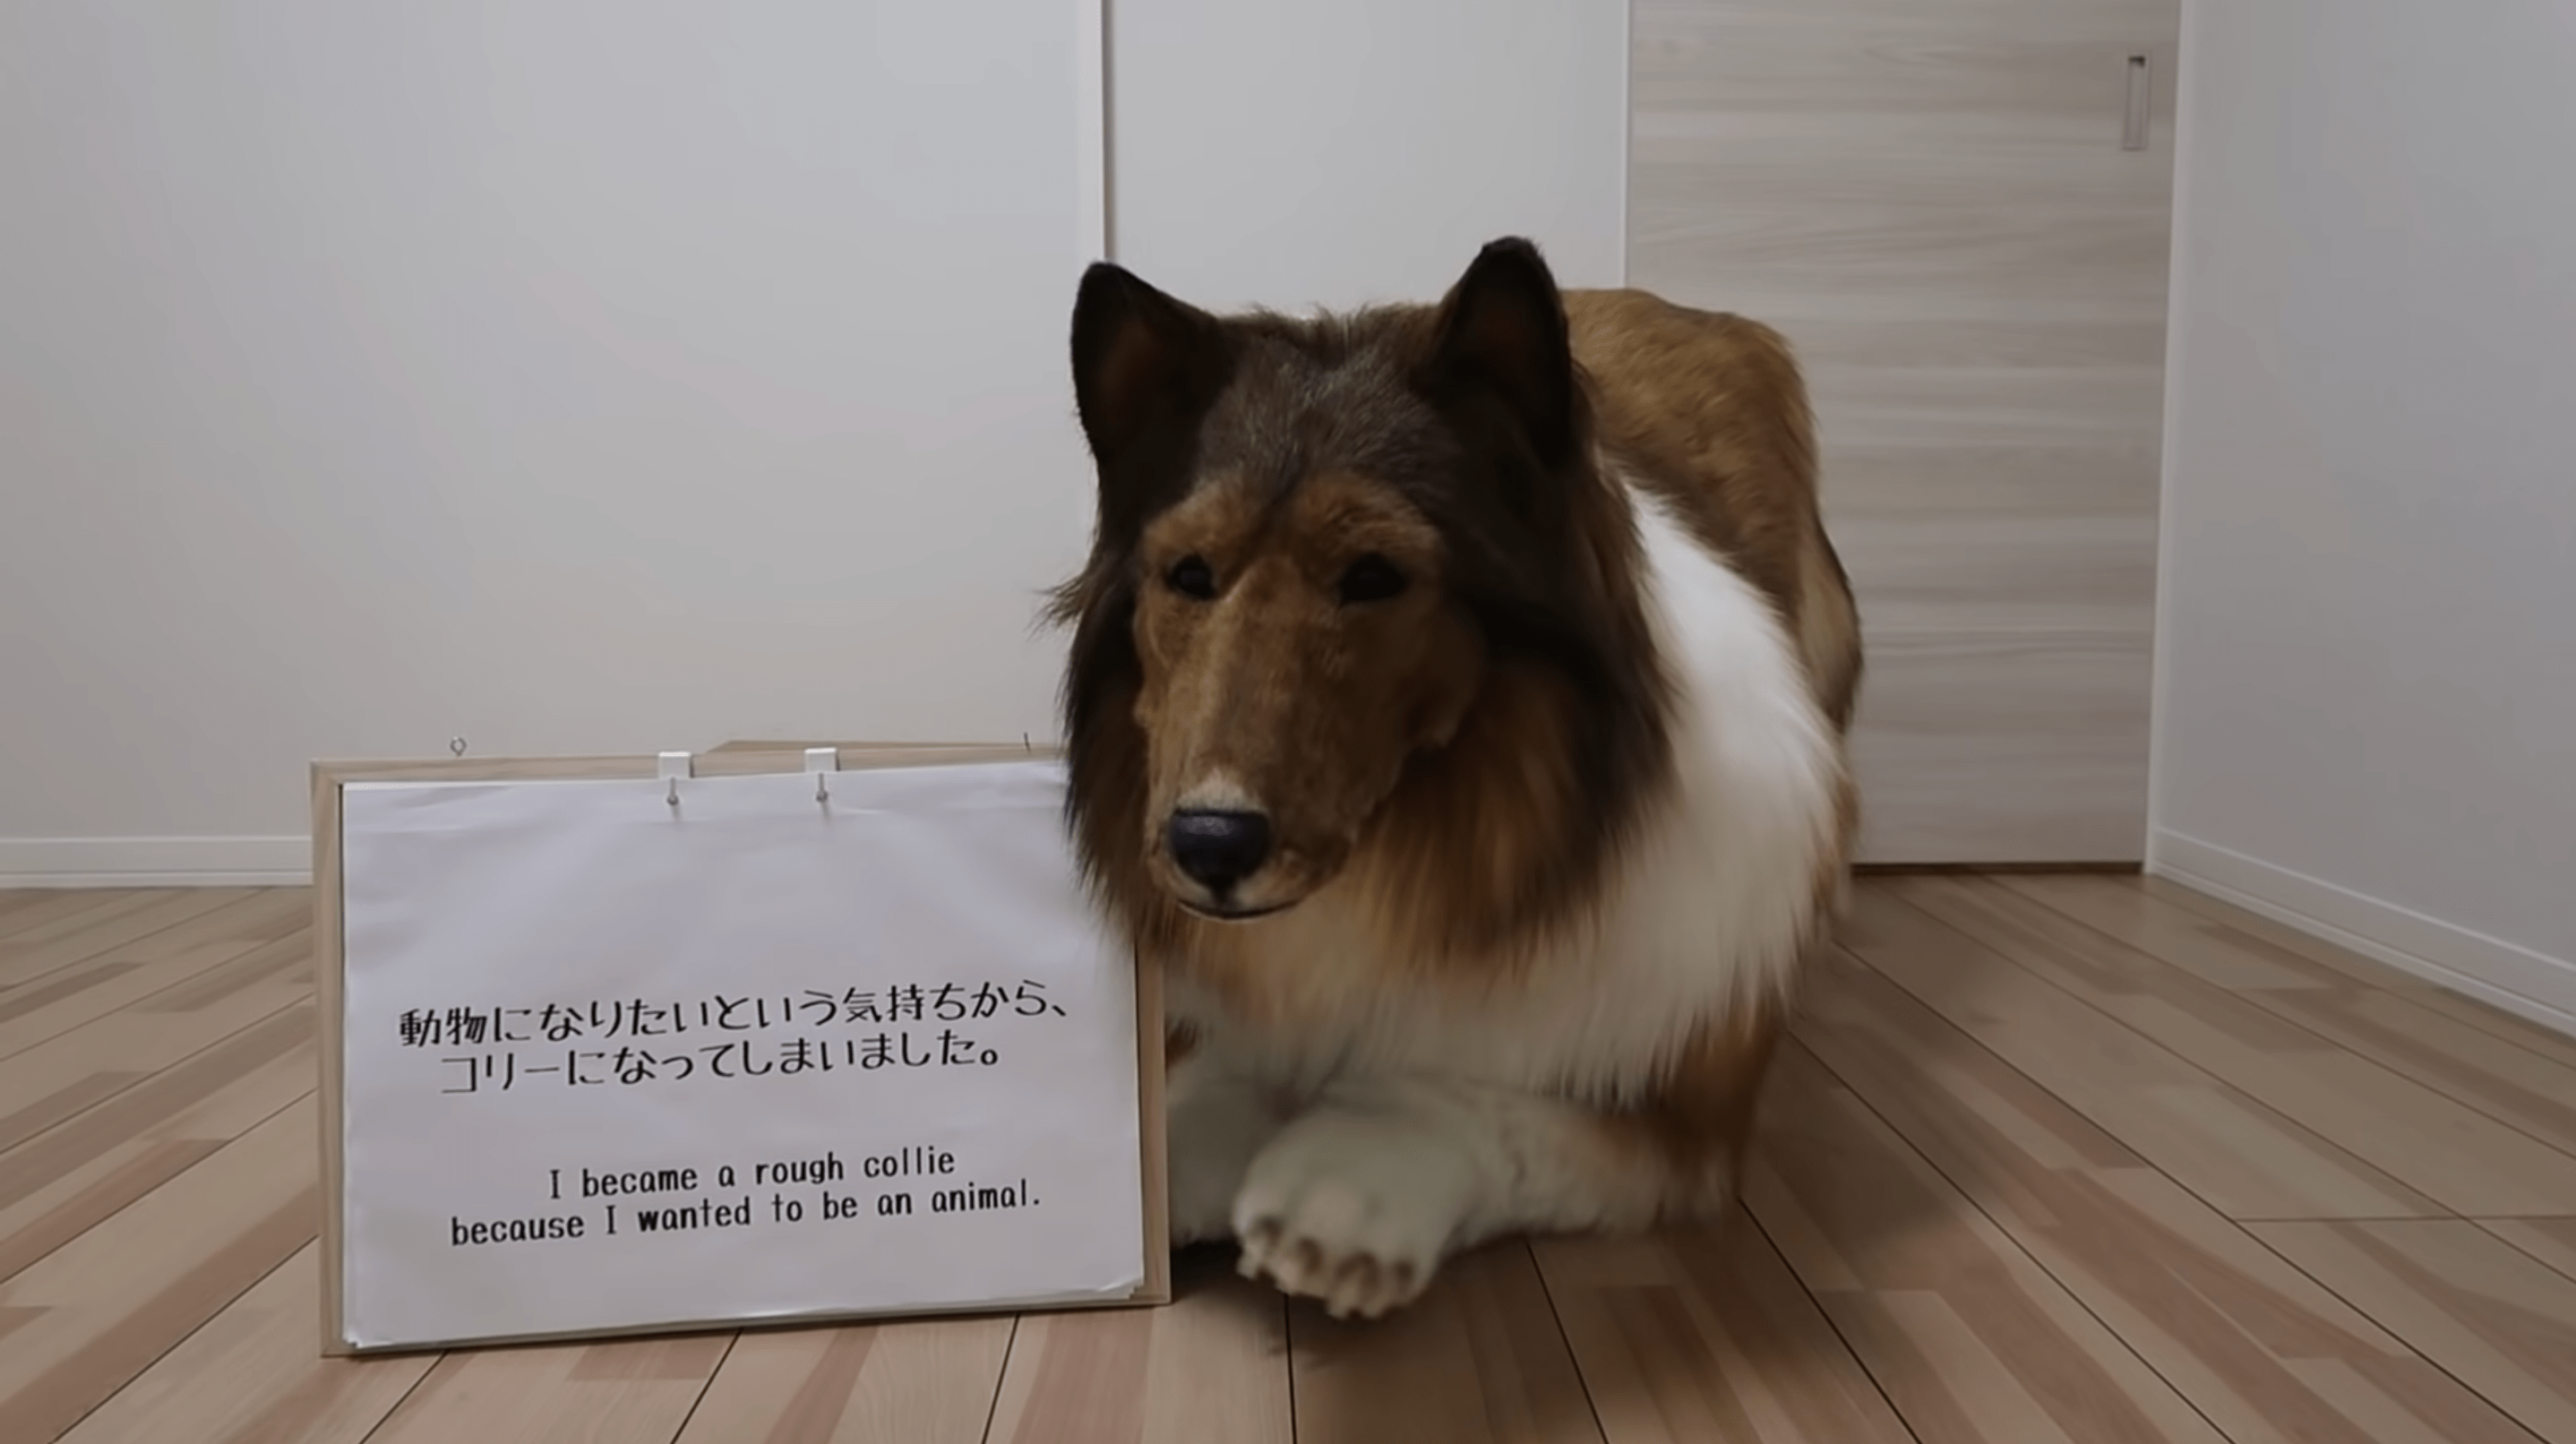 Japanese Man Spends S$20K On Border Collie Costume To Fulfil Dream